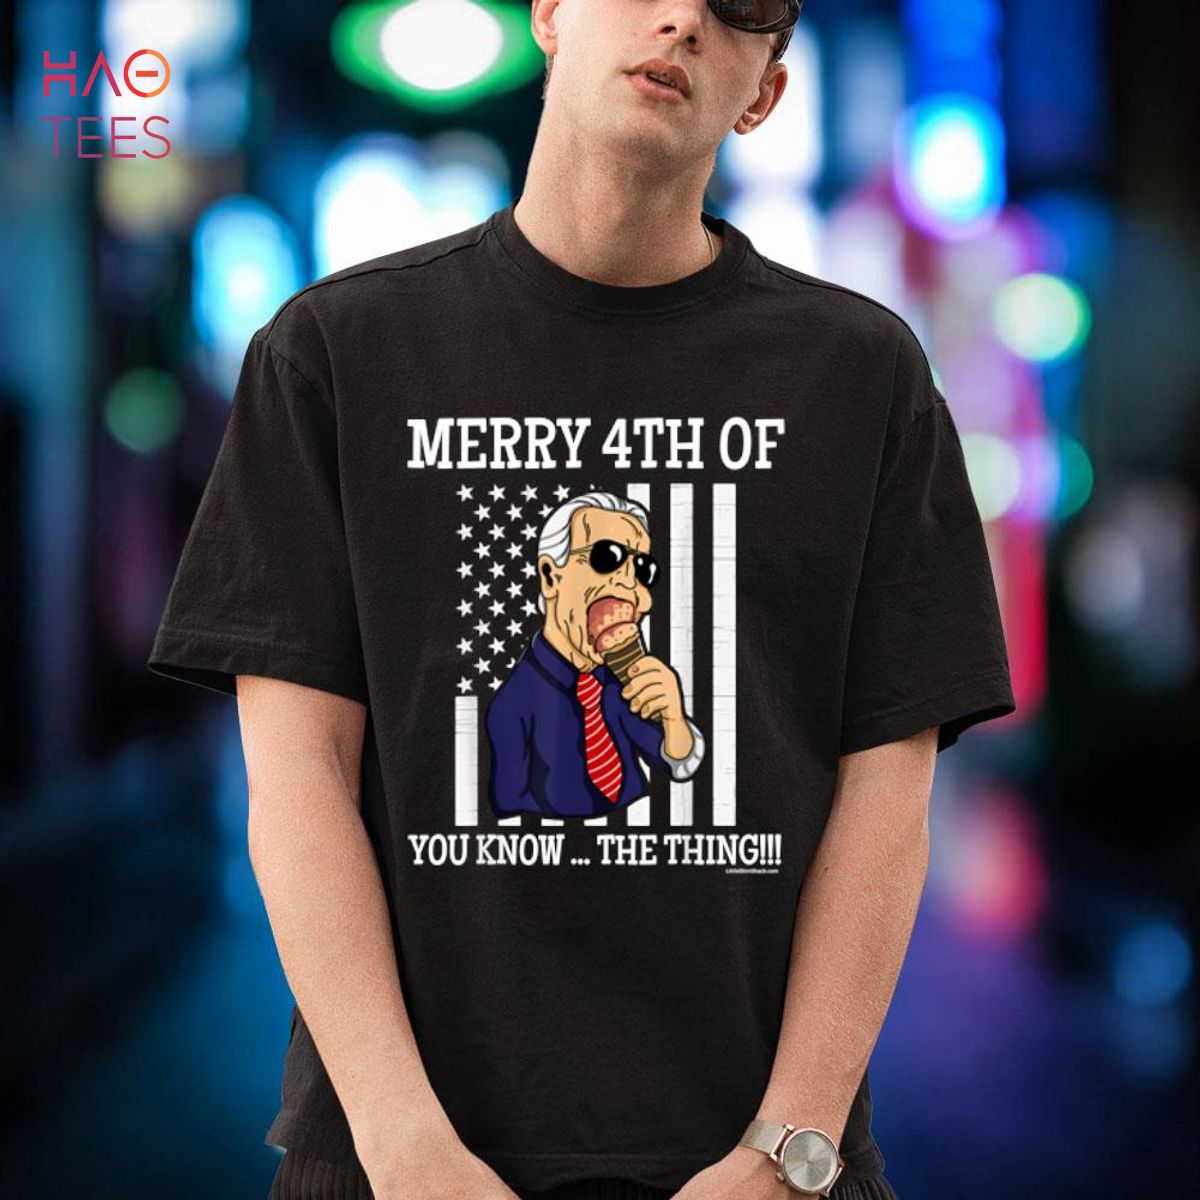 Funny Joe Biden Dazed Merry 4th Of You Know... The Thing Shirt